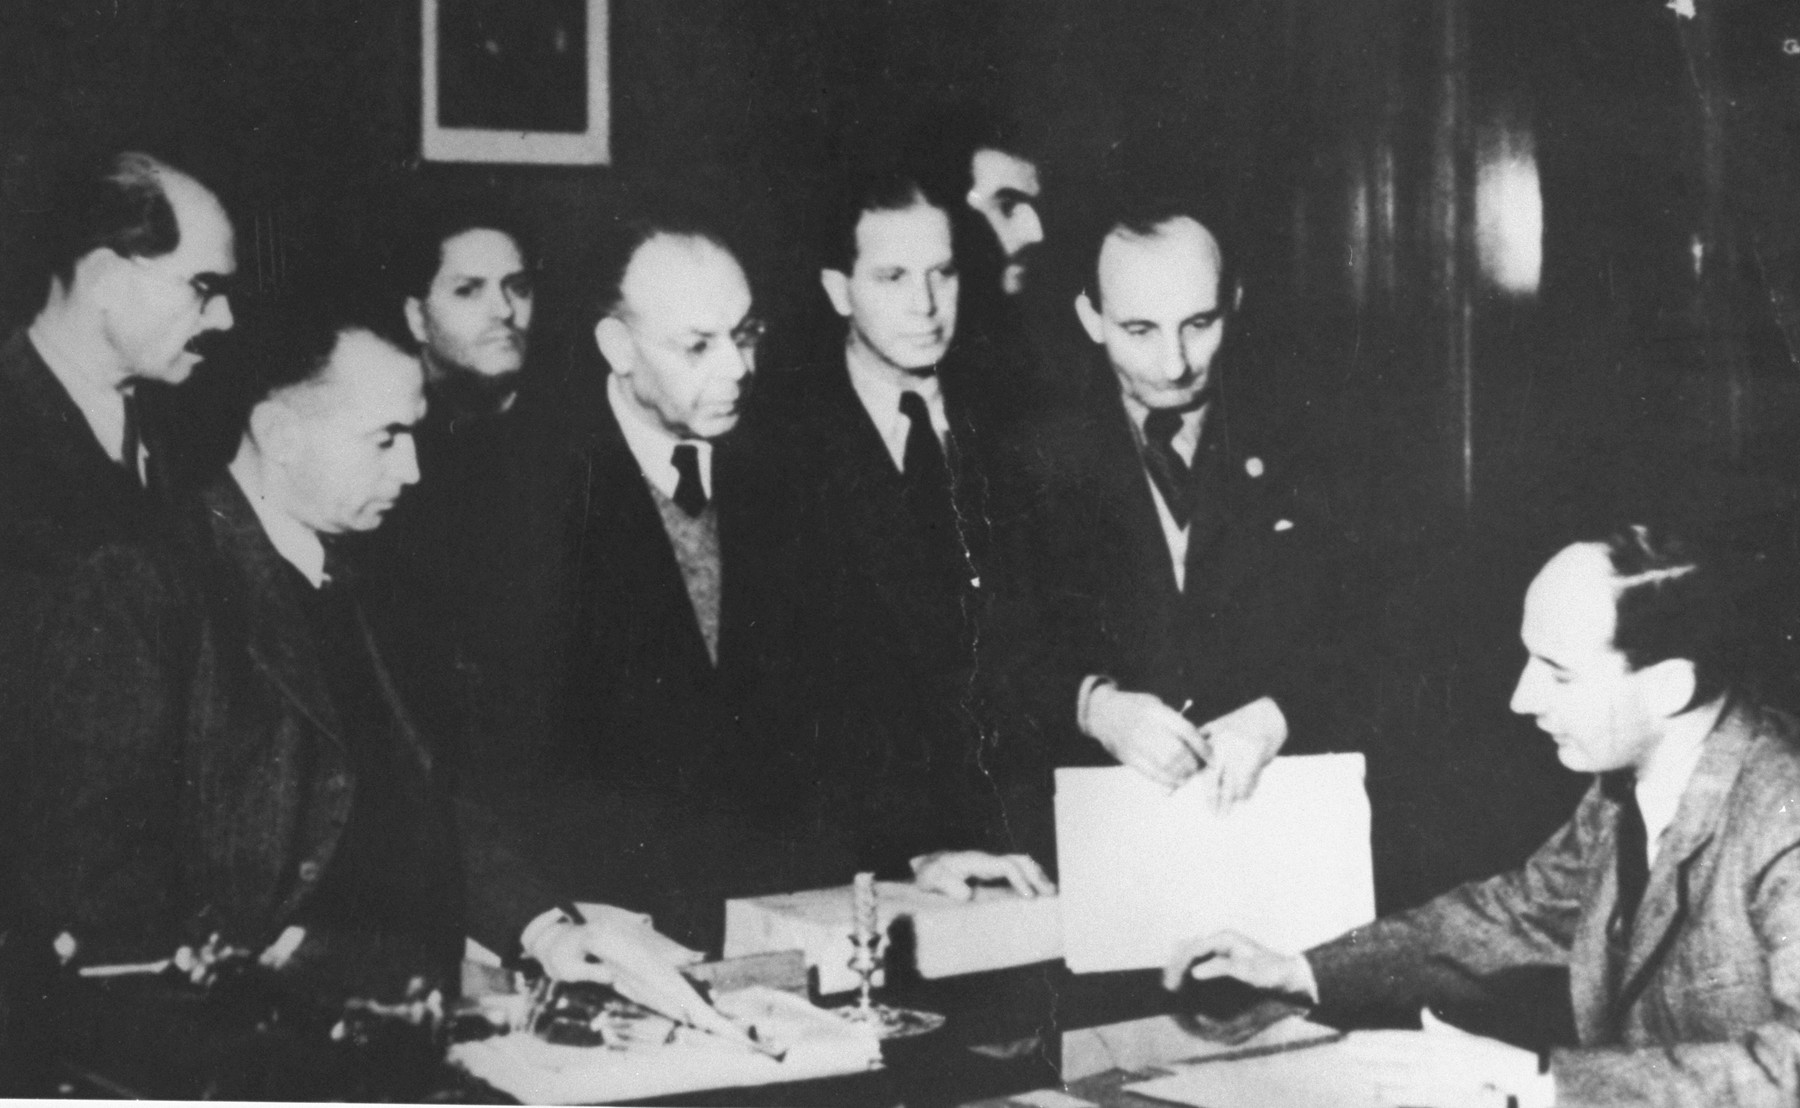 Raoul Wallenberg in his Budapest office with his Jewish co-workers in November 1944. 

Pictured from left to right are: Dannonbergt, Hugo Wohl, Klein (behind), Forgacs (with V-neck sweater), and Paul Hegedus.  Behind are Tibor Vandor and Dr. Otto Fleishmann.